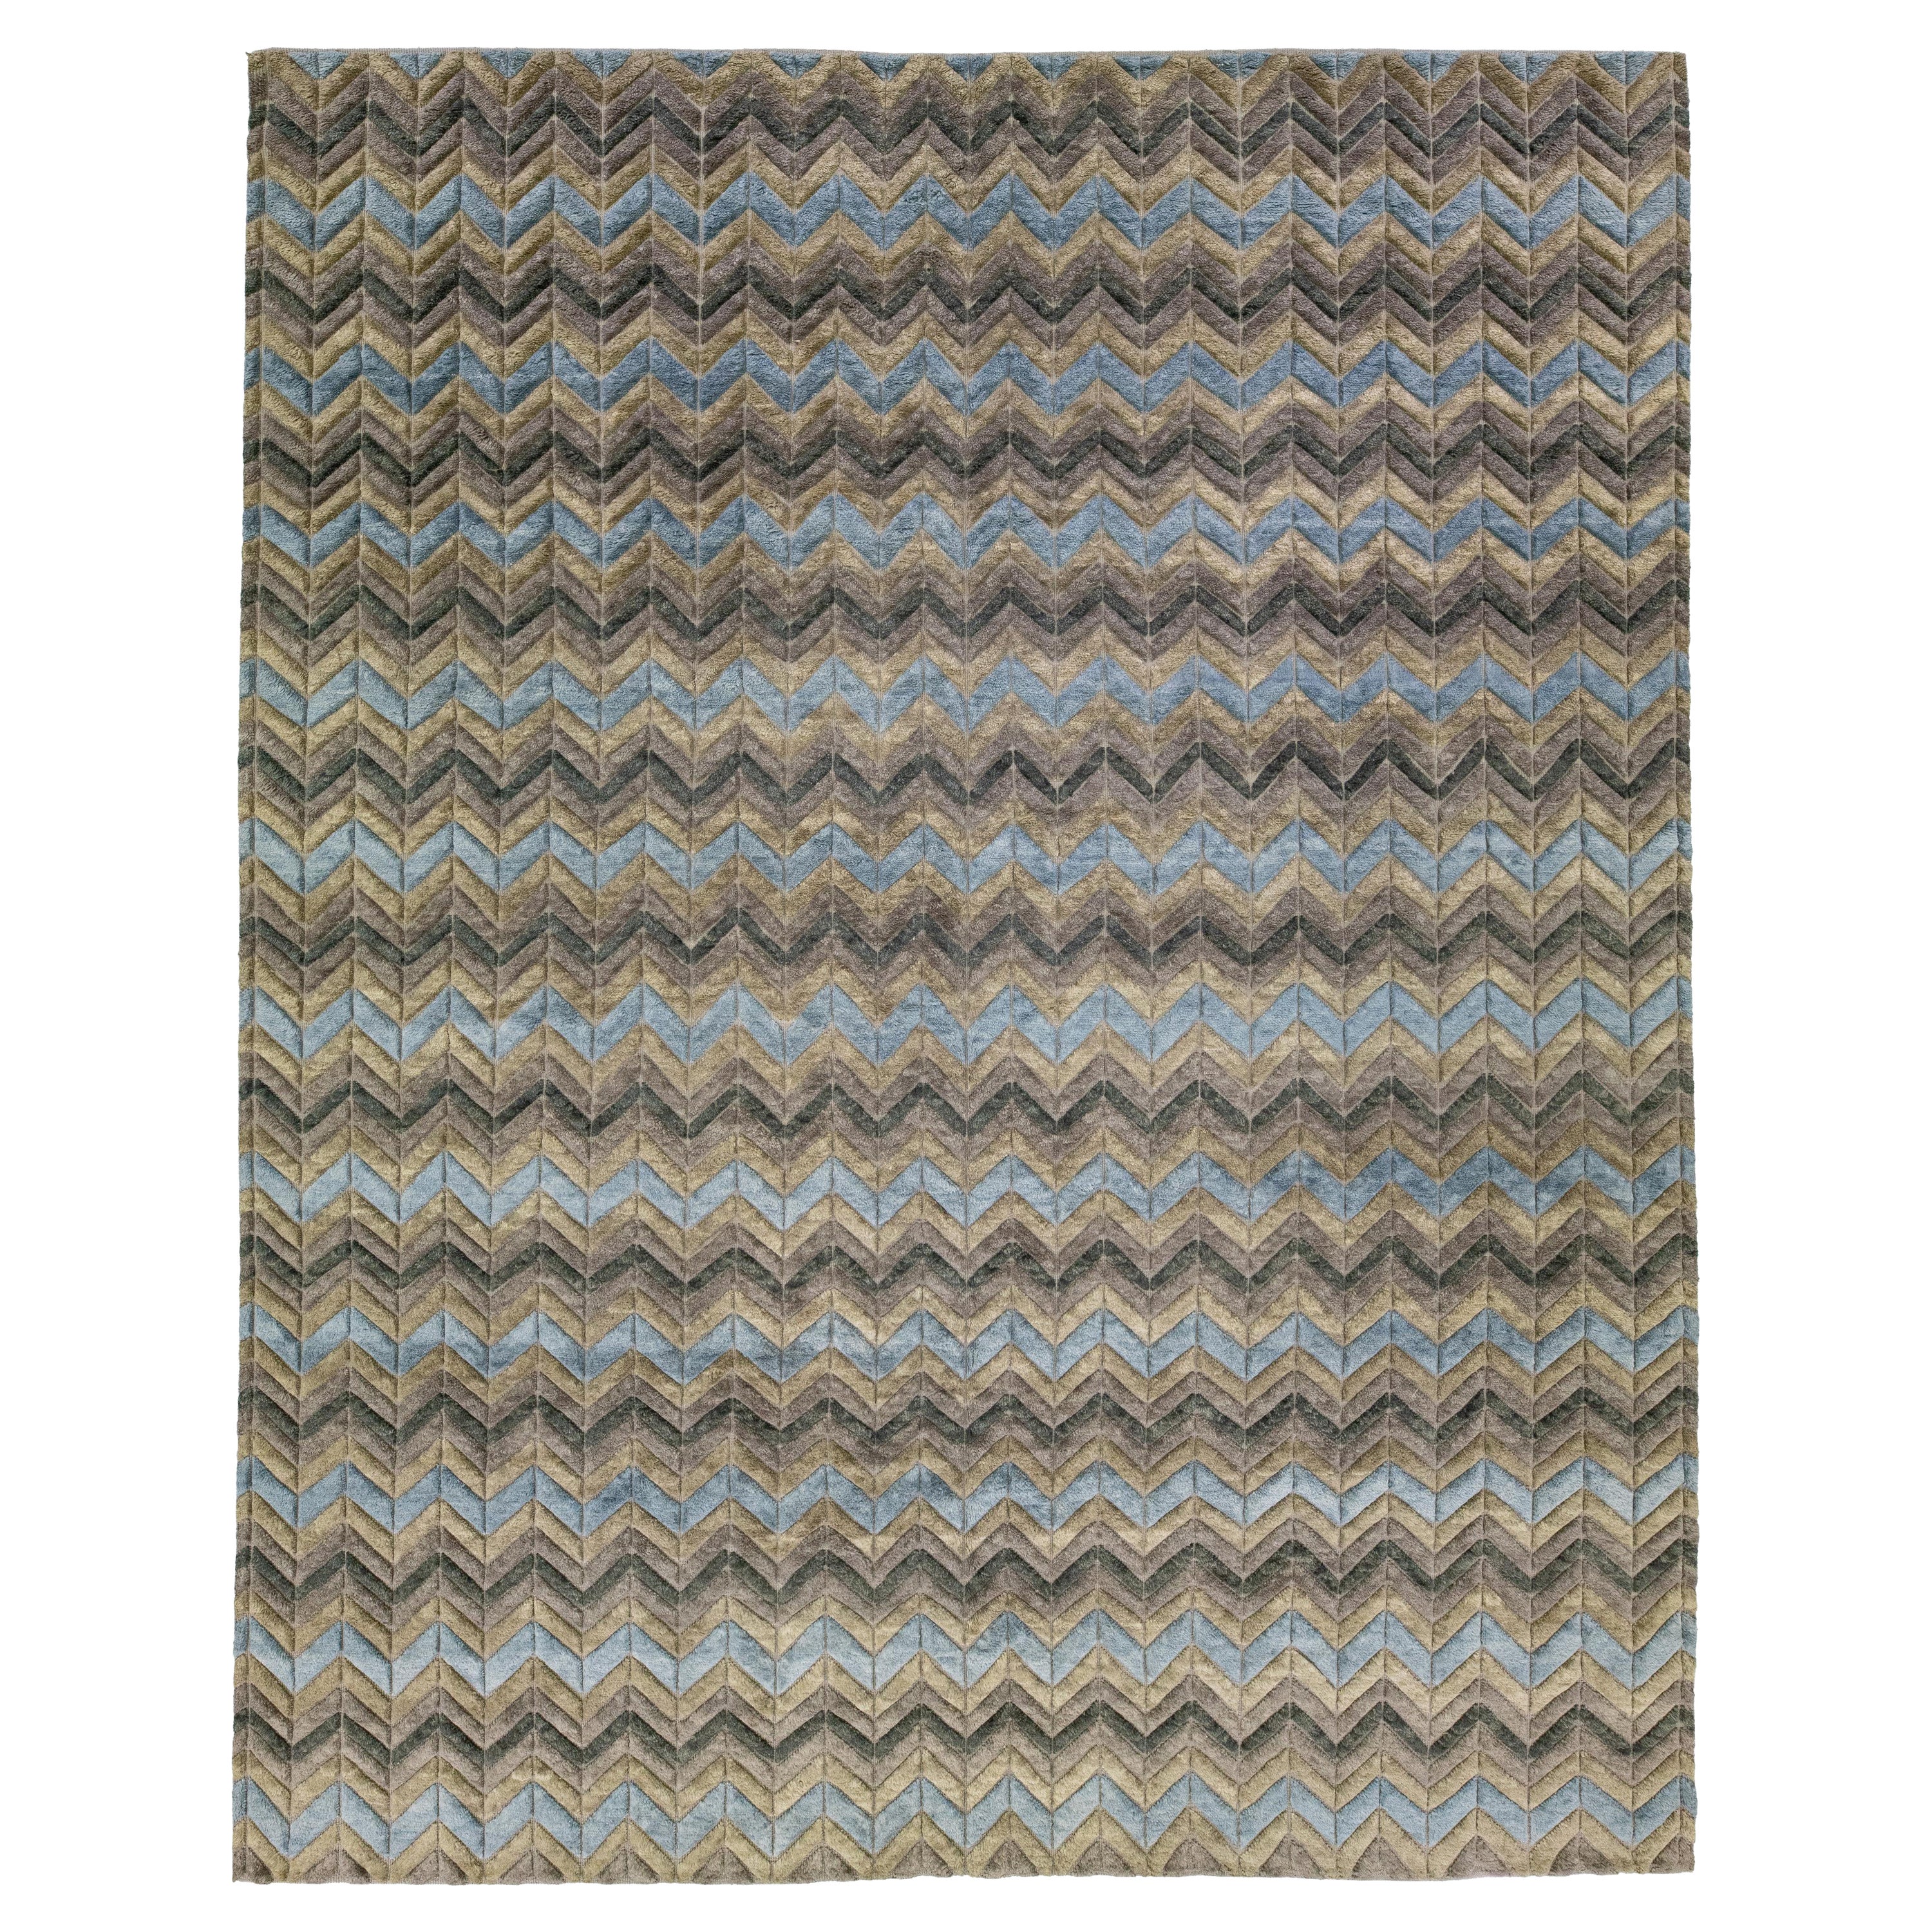 Contemporary Moroccan Style Wool Rug With Geometric Motif In Earthy Shades